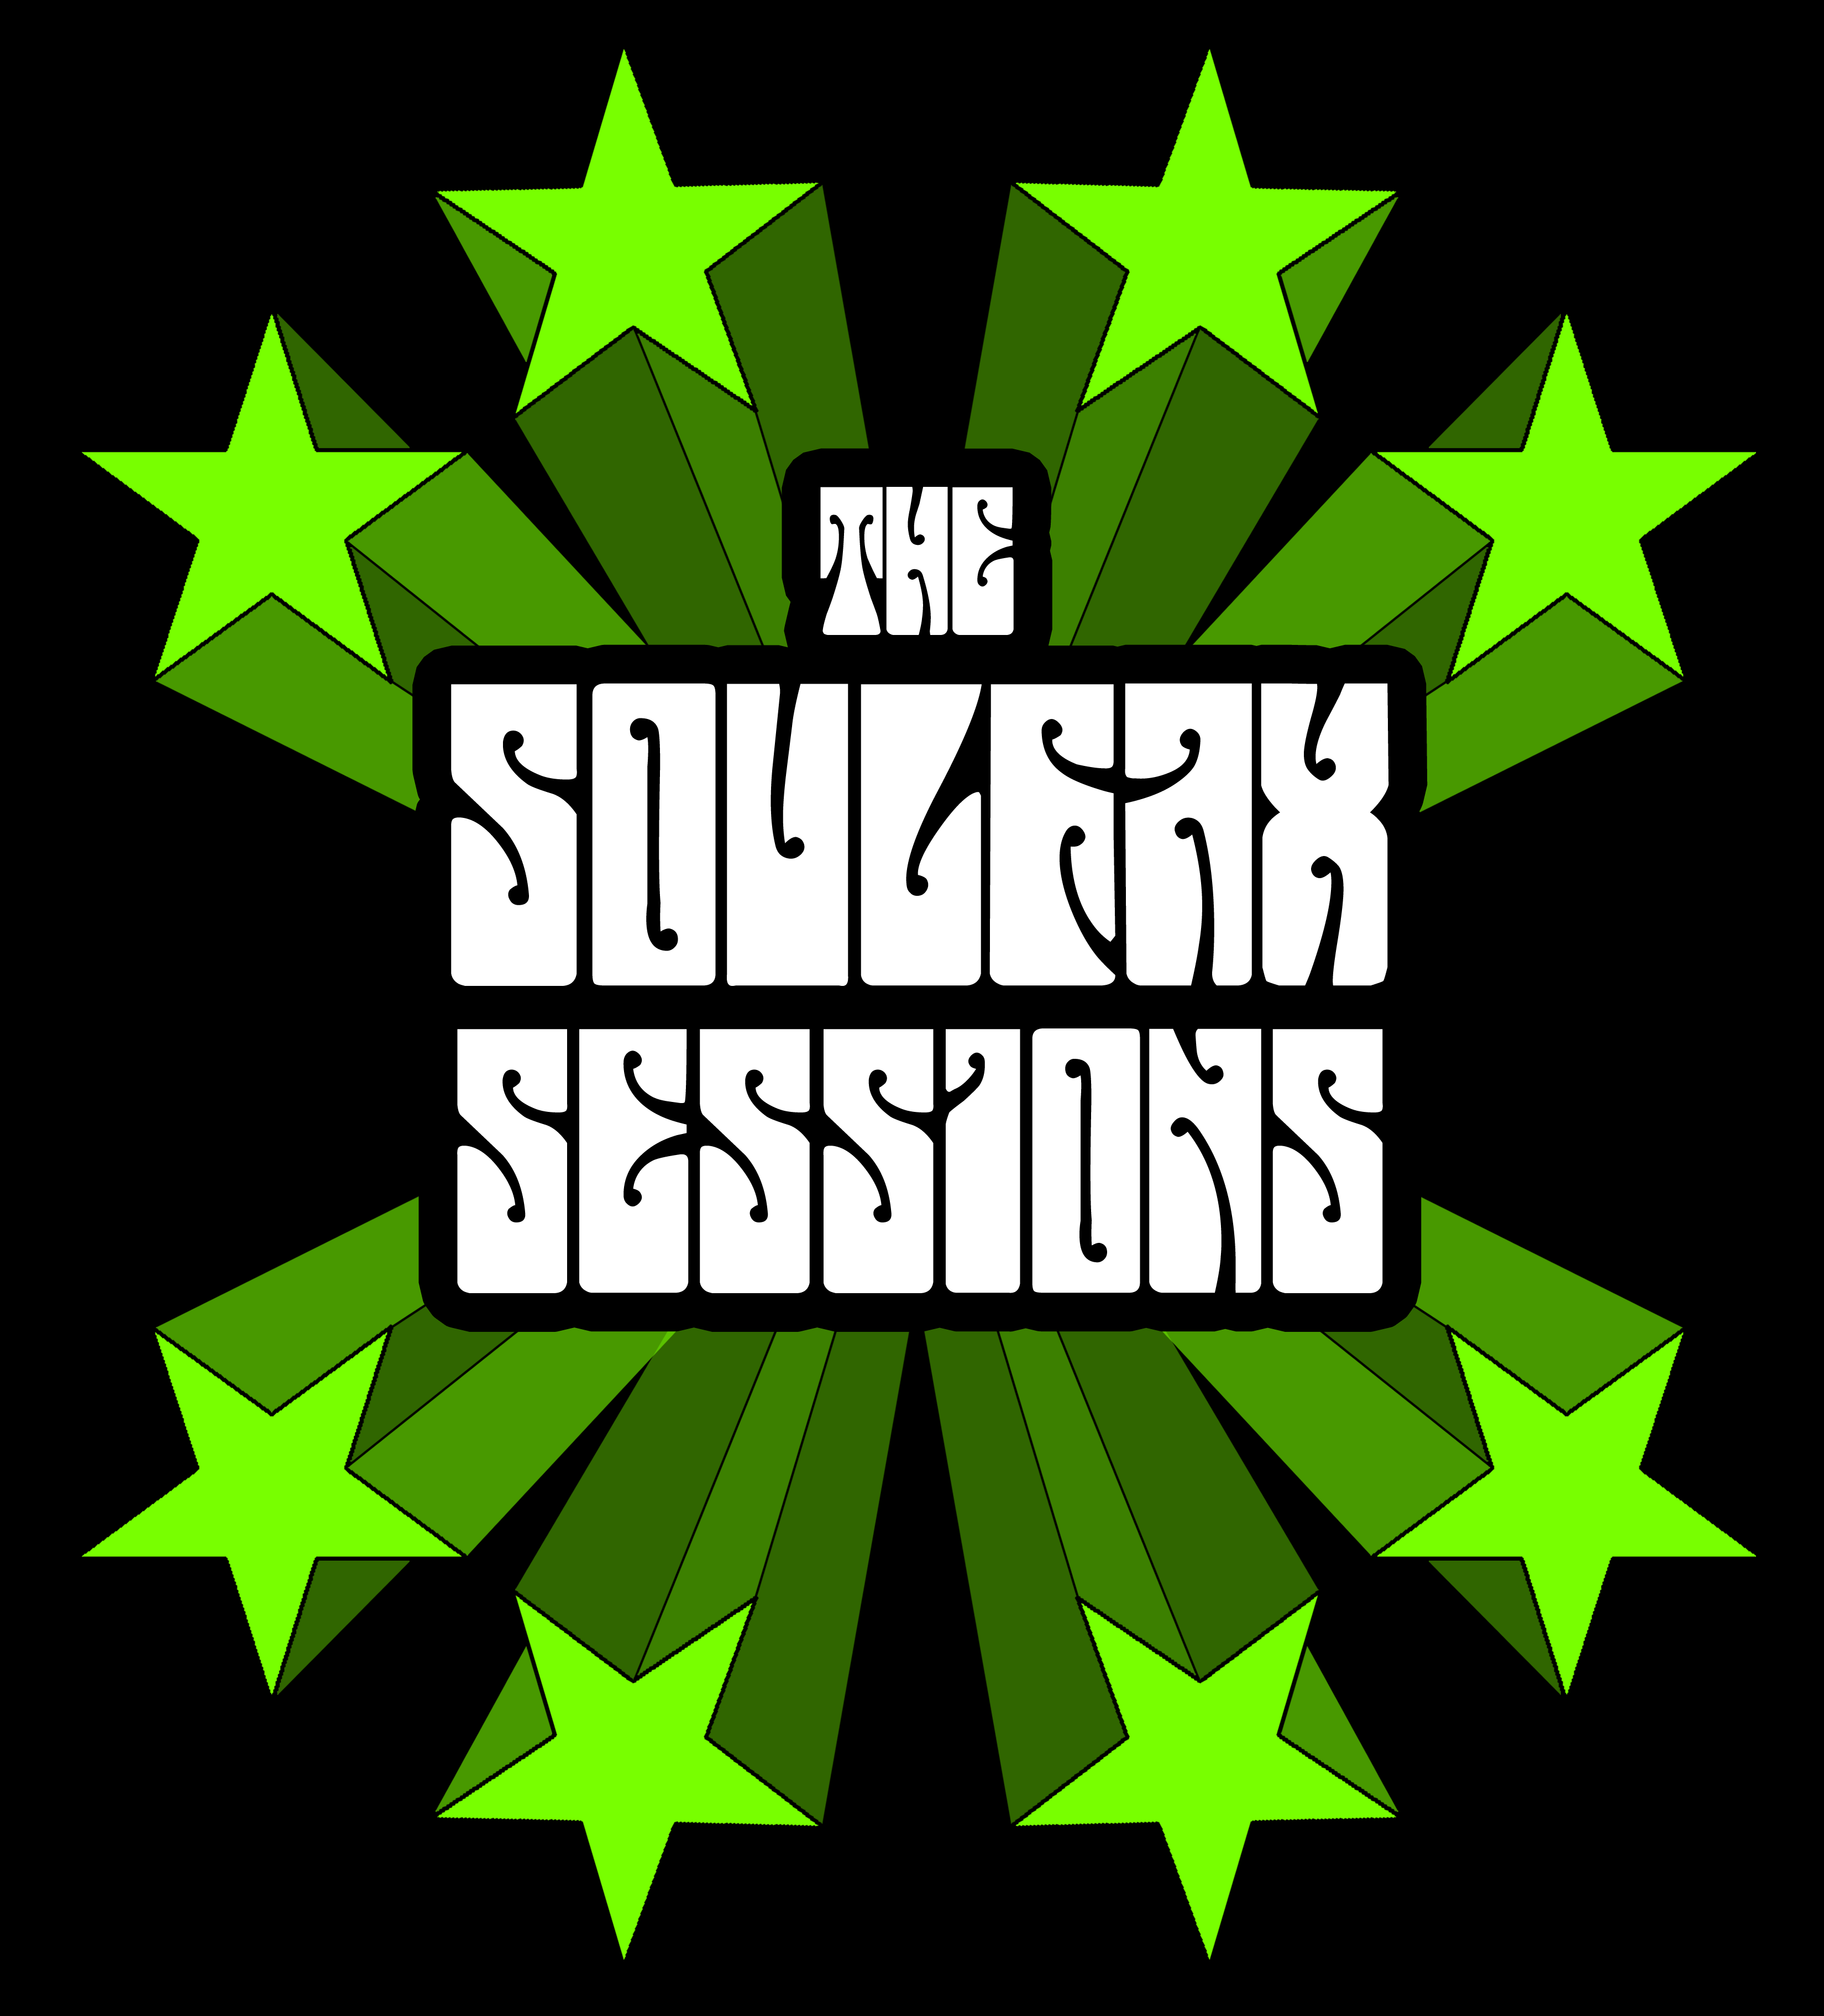 Great American Taxi, The Congress & Fox Street Allstars Join Forces for SoulFax Sessions